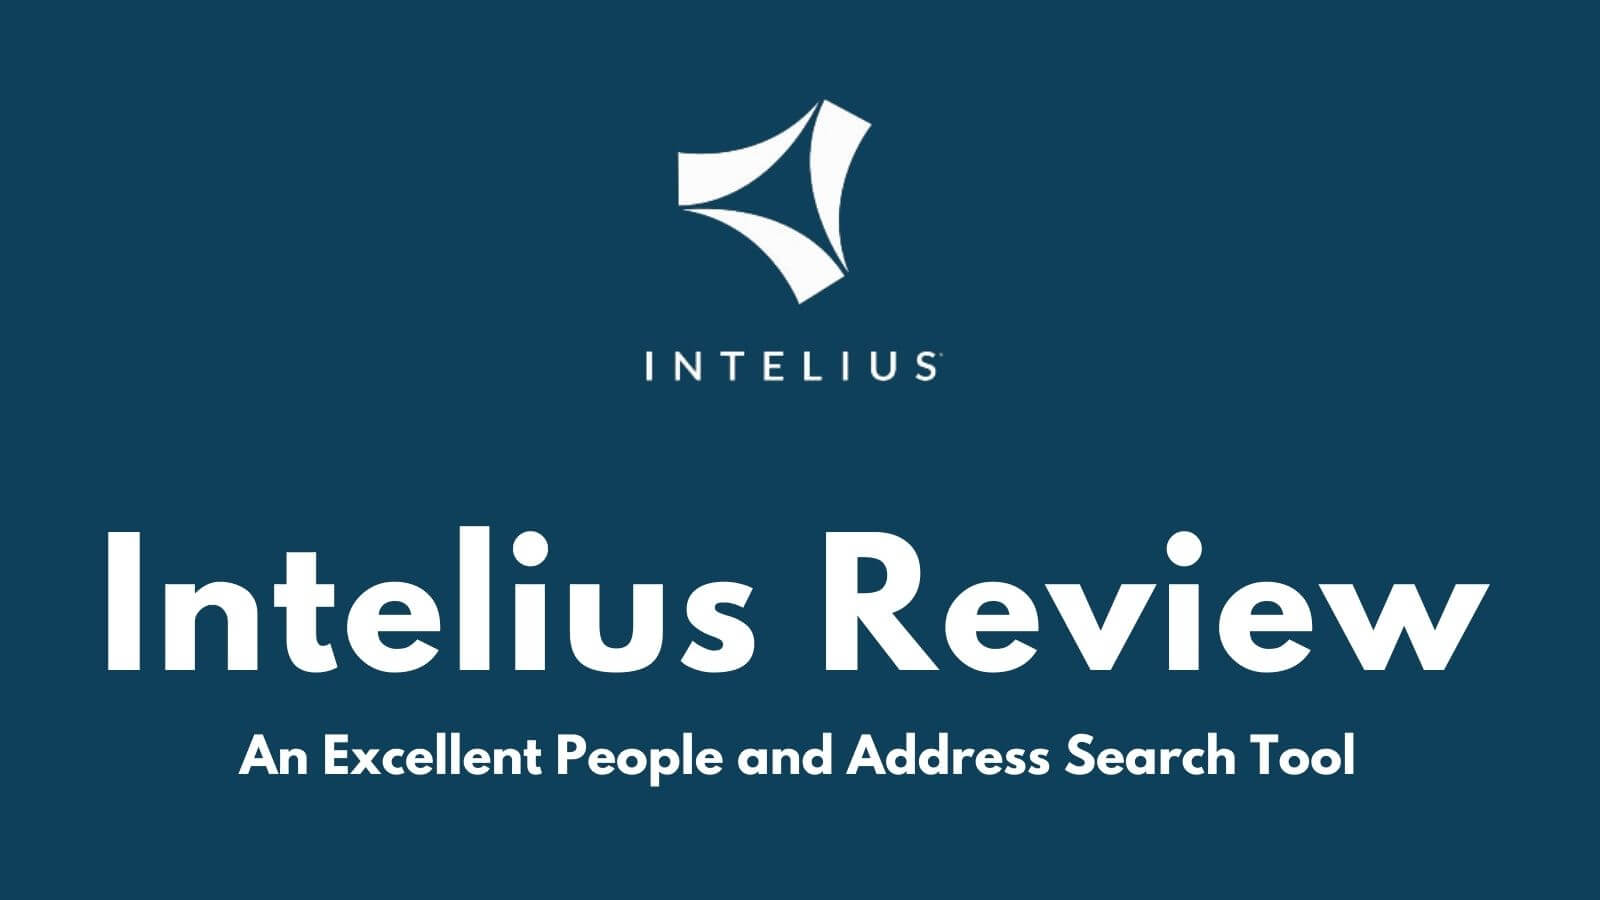 Intelius Review: An Excellent People and Address Search Tool